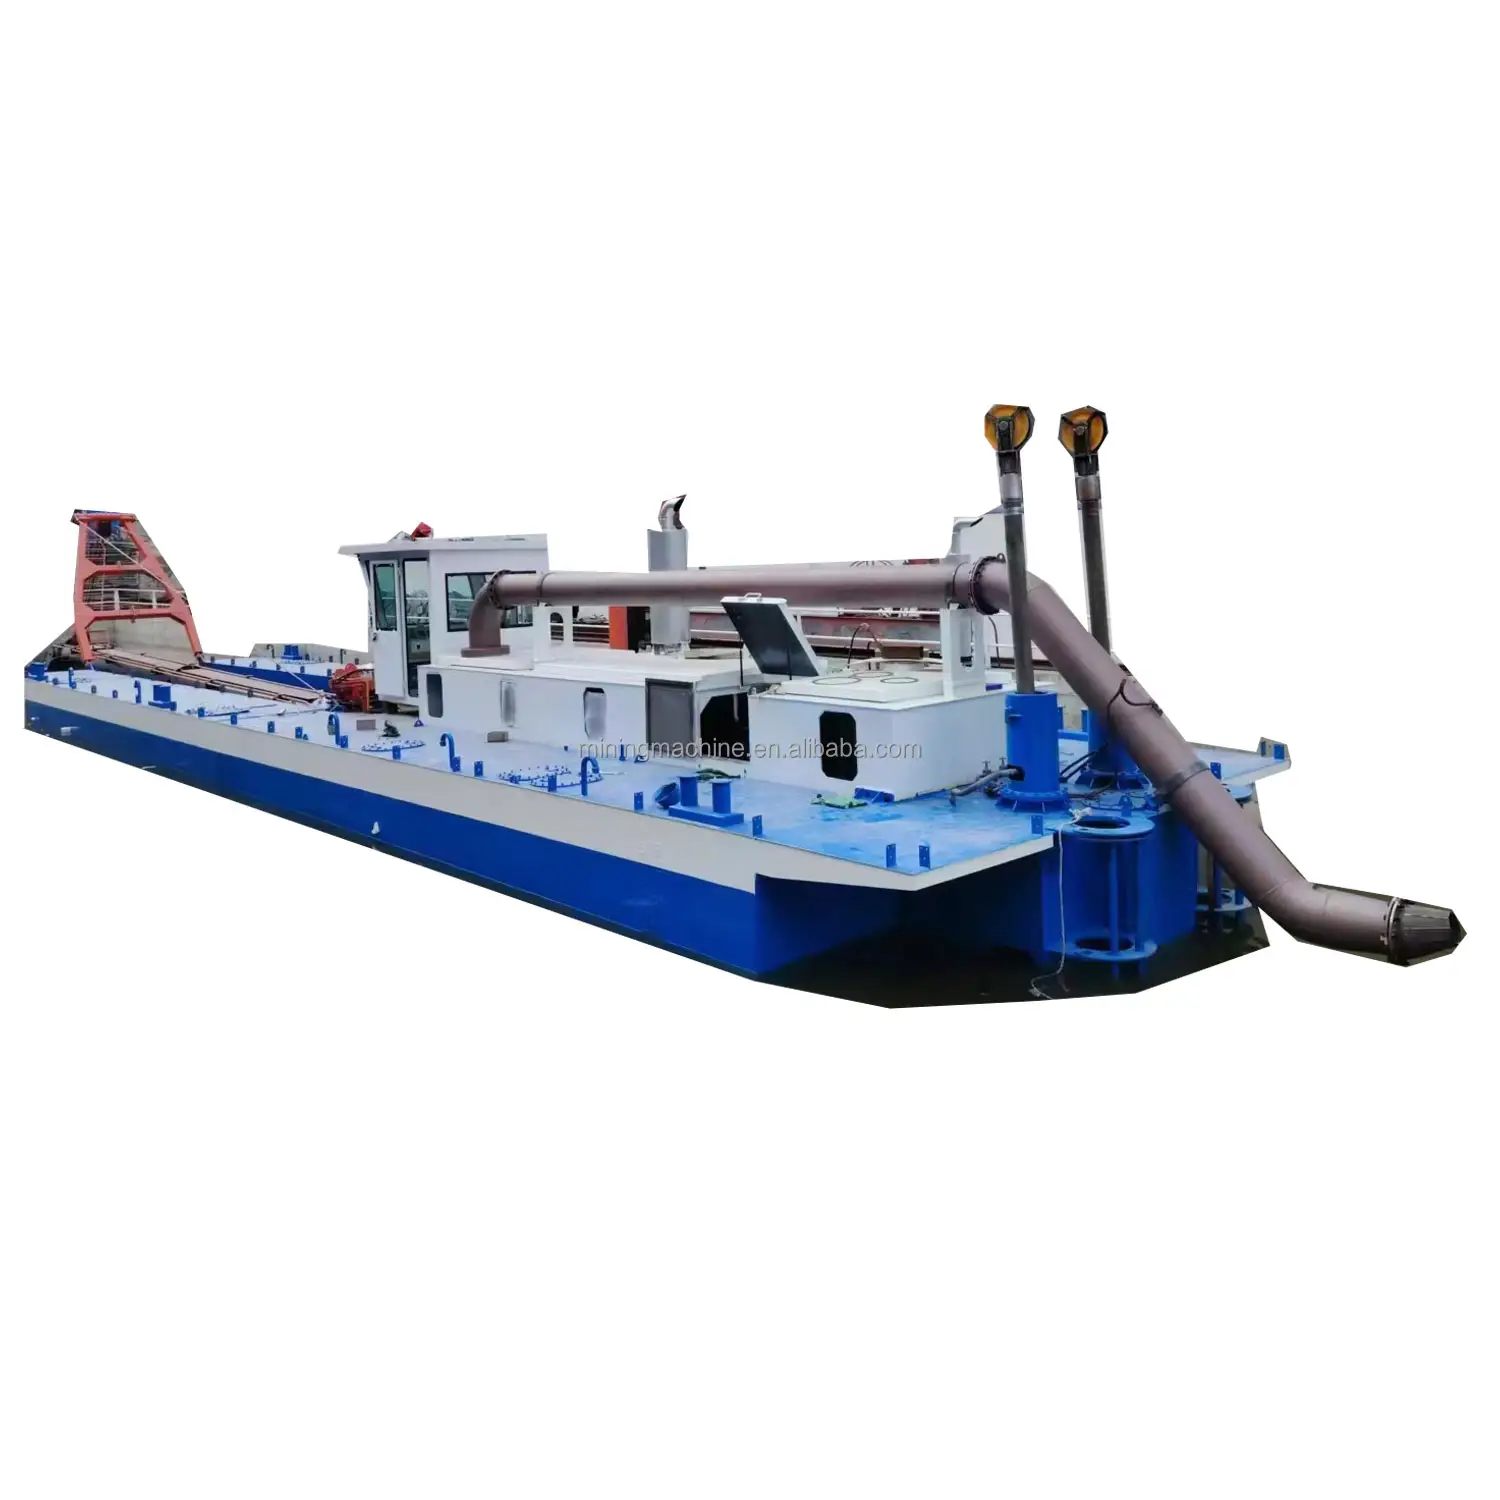 Keda Sand Cutter Suction Dredger Used For River/lake Cleaning